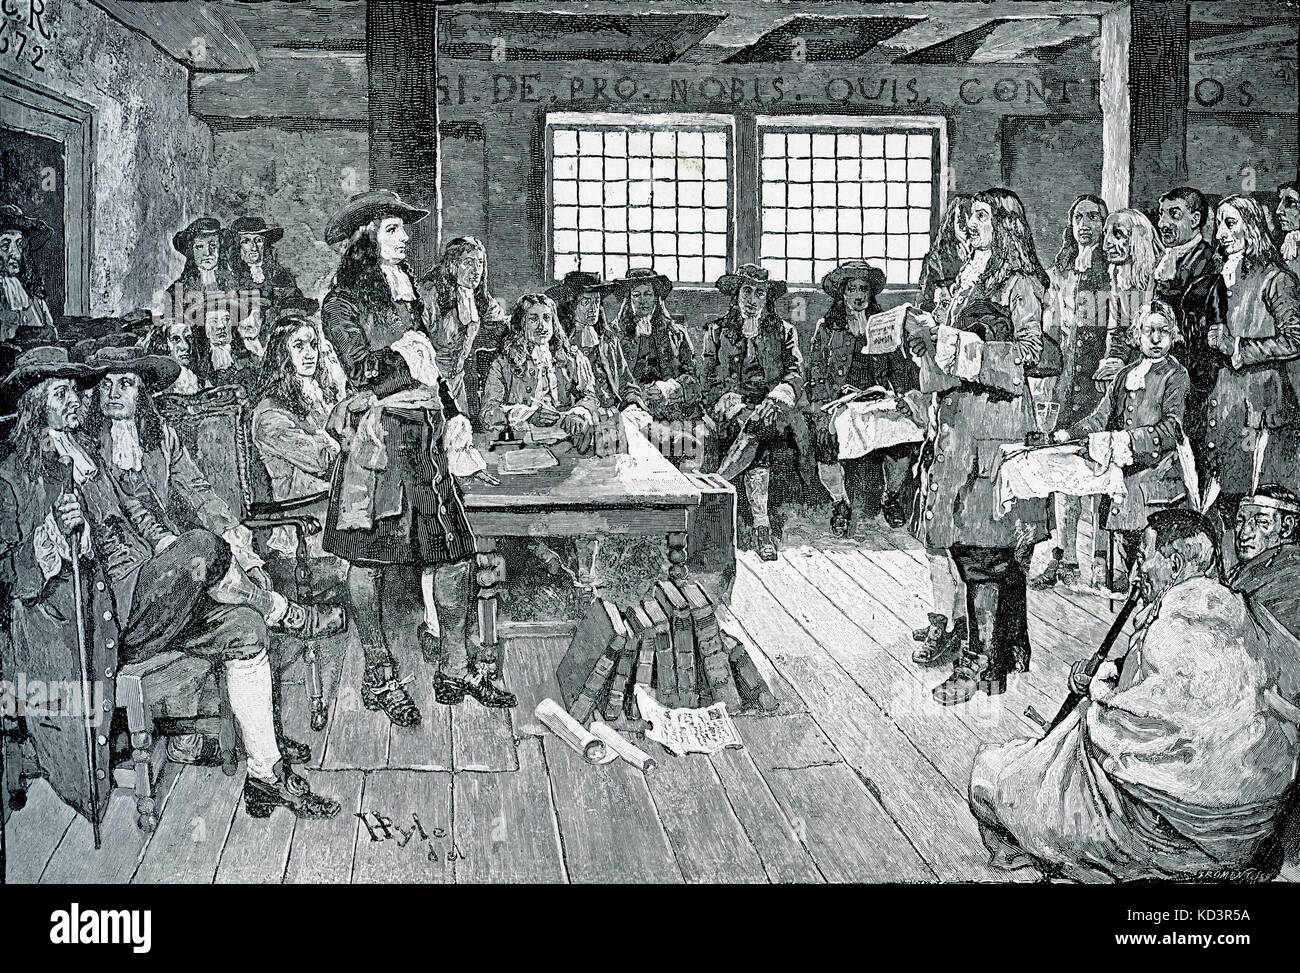 William Penn on his first visit to America, 1682. Founding of Pennsylvania. The colonists pledge allegiance to Penn as their new proprietor. Illustration by Howard Pyle, 1883 Stock Photo